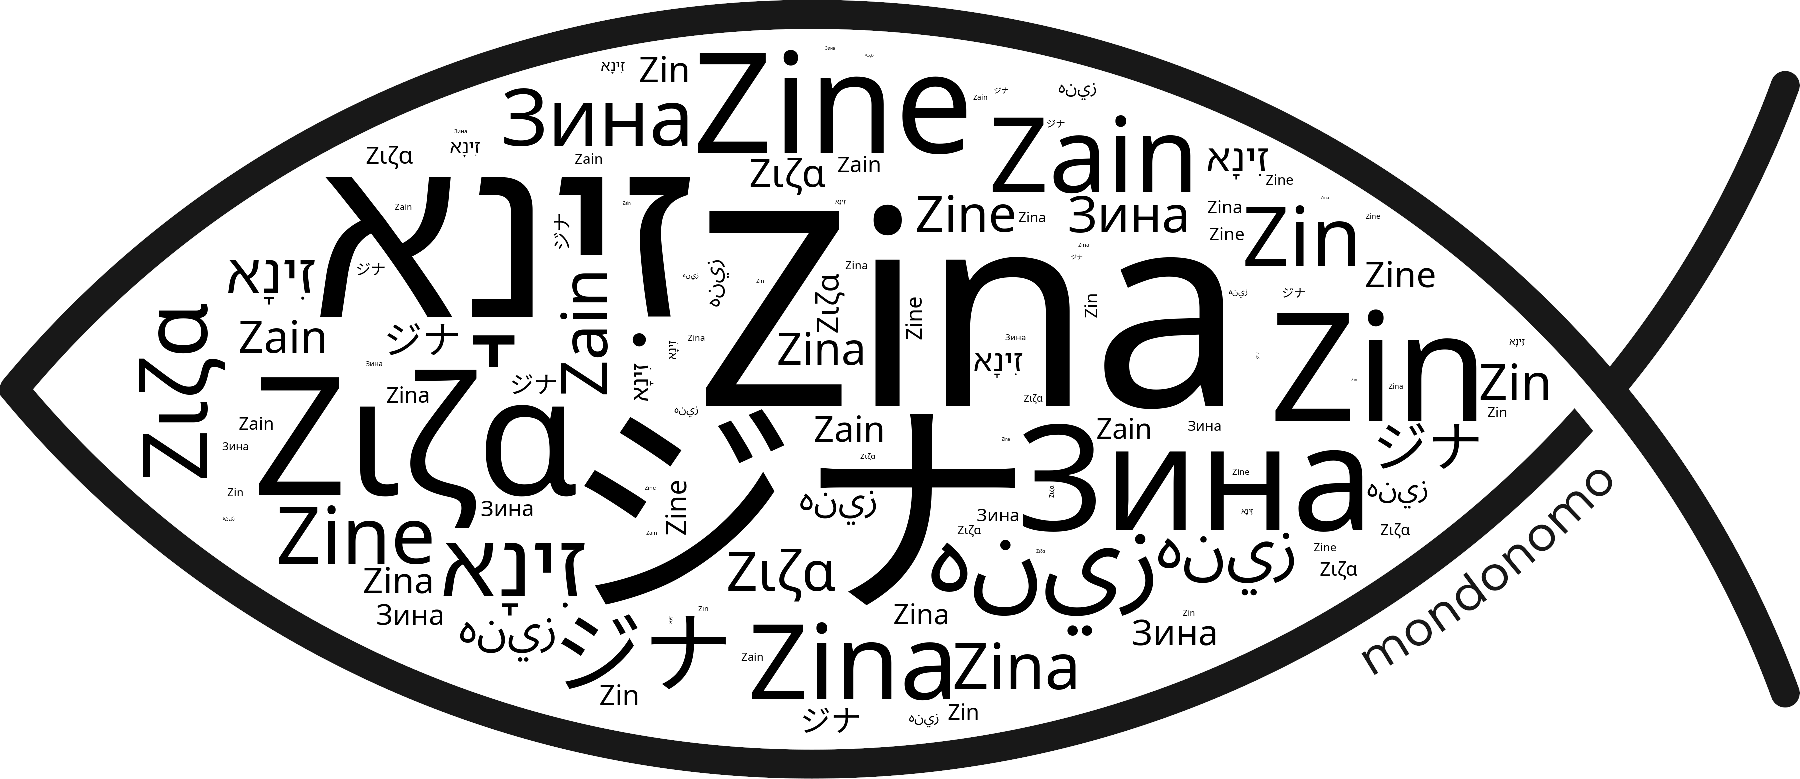 Name Zina in the world's Bibles